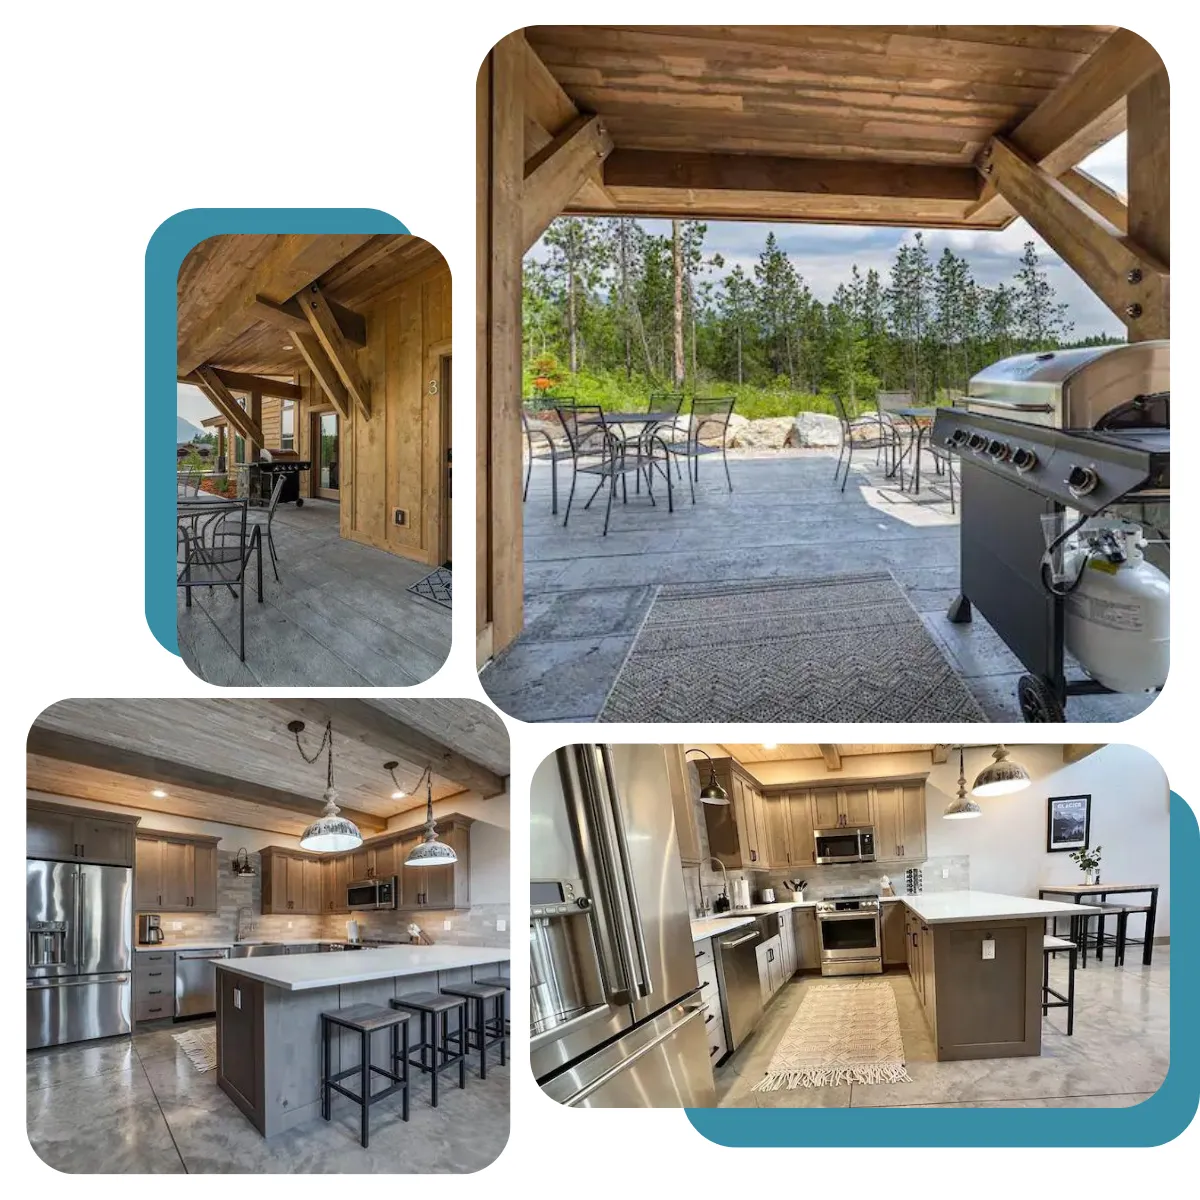 At "The Spirit of Glacier," the kitchen comes with high-quality appliances and connects smoothly with dining and living areas, making interaction easy. Plus, there's a cozy dining spot indoors and outdoor options for al fresco meals.